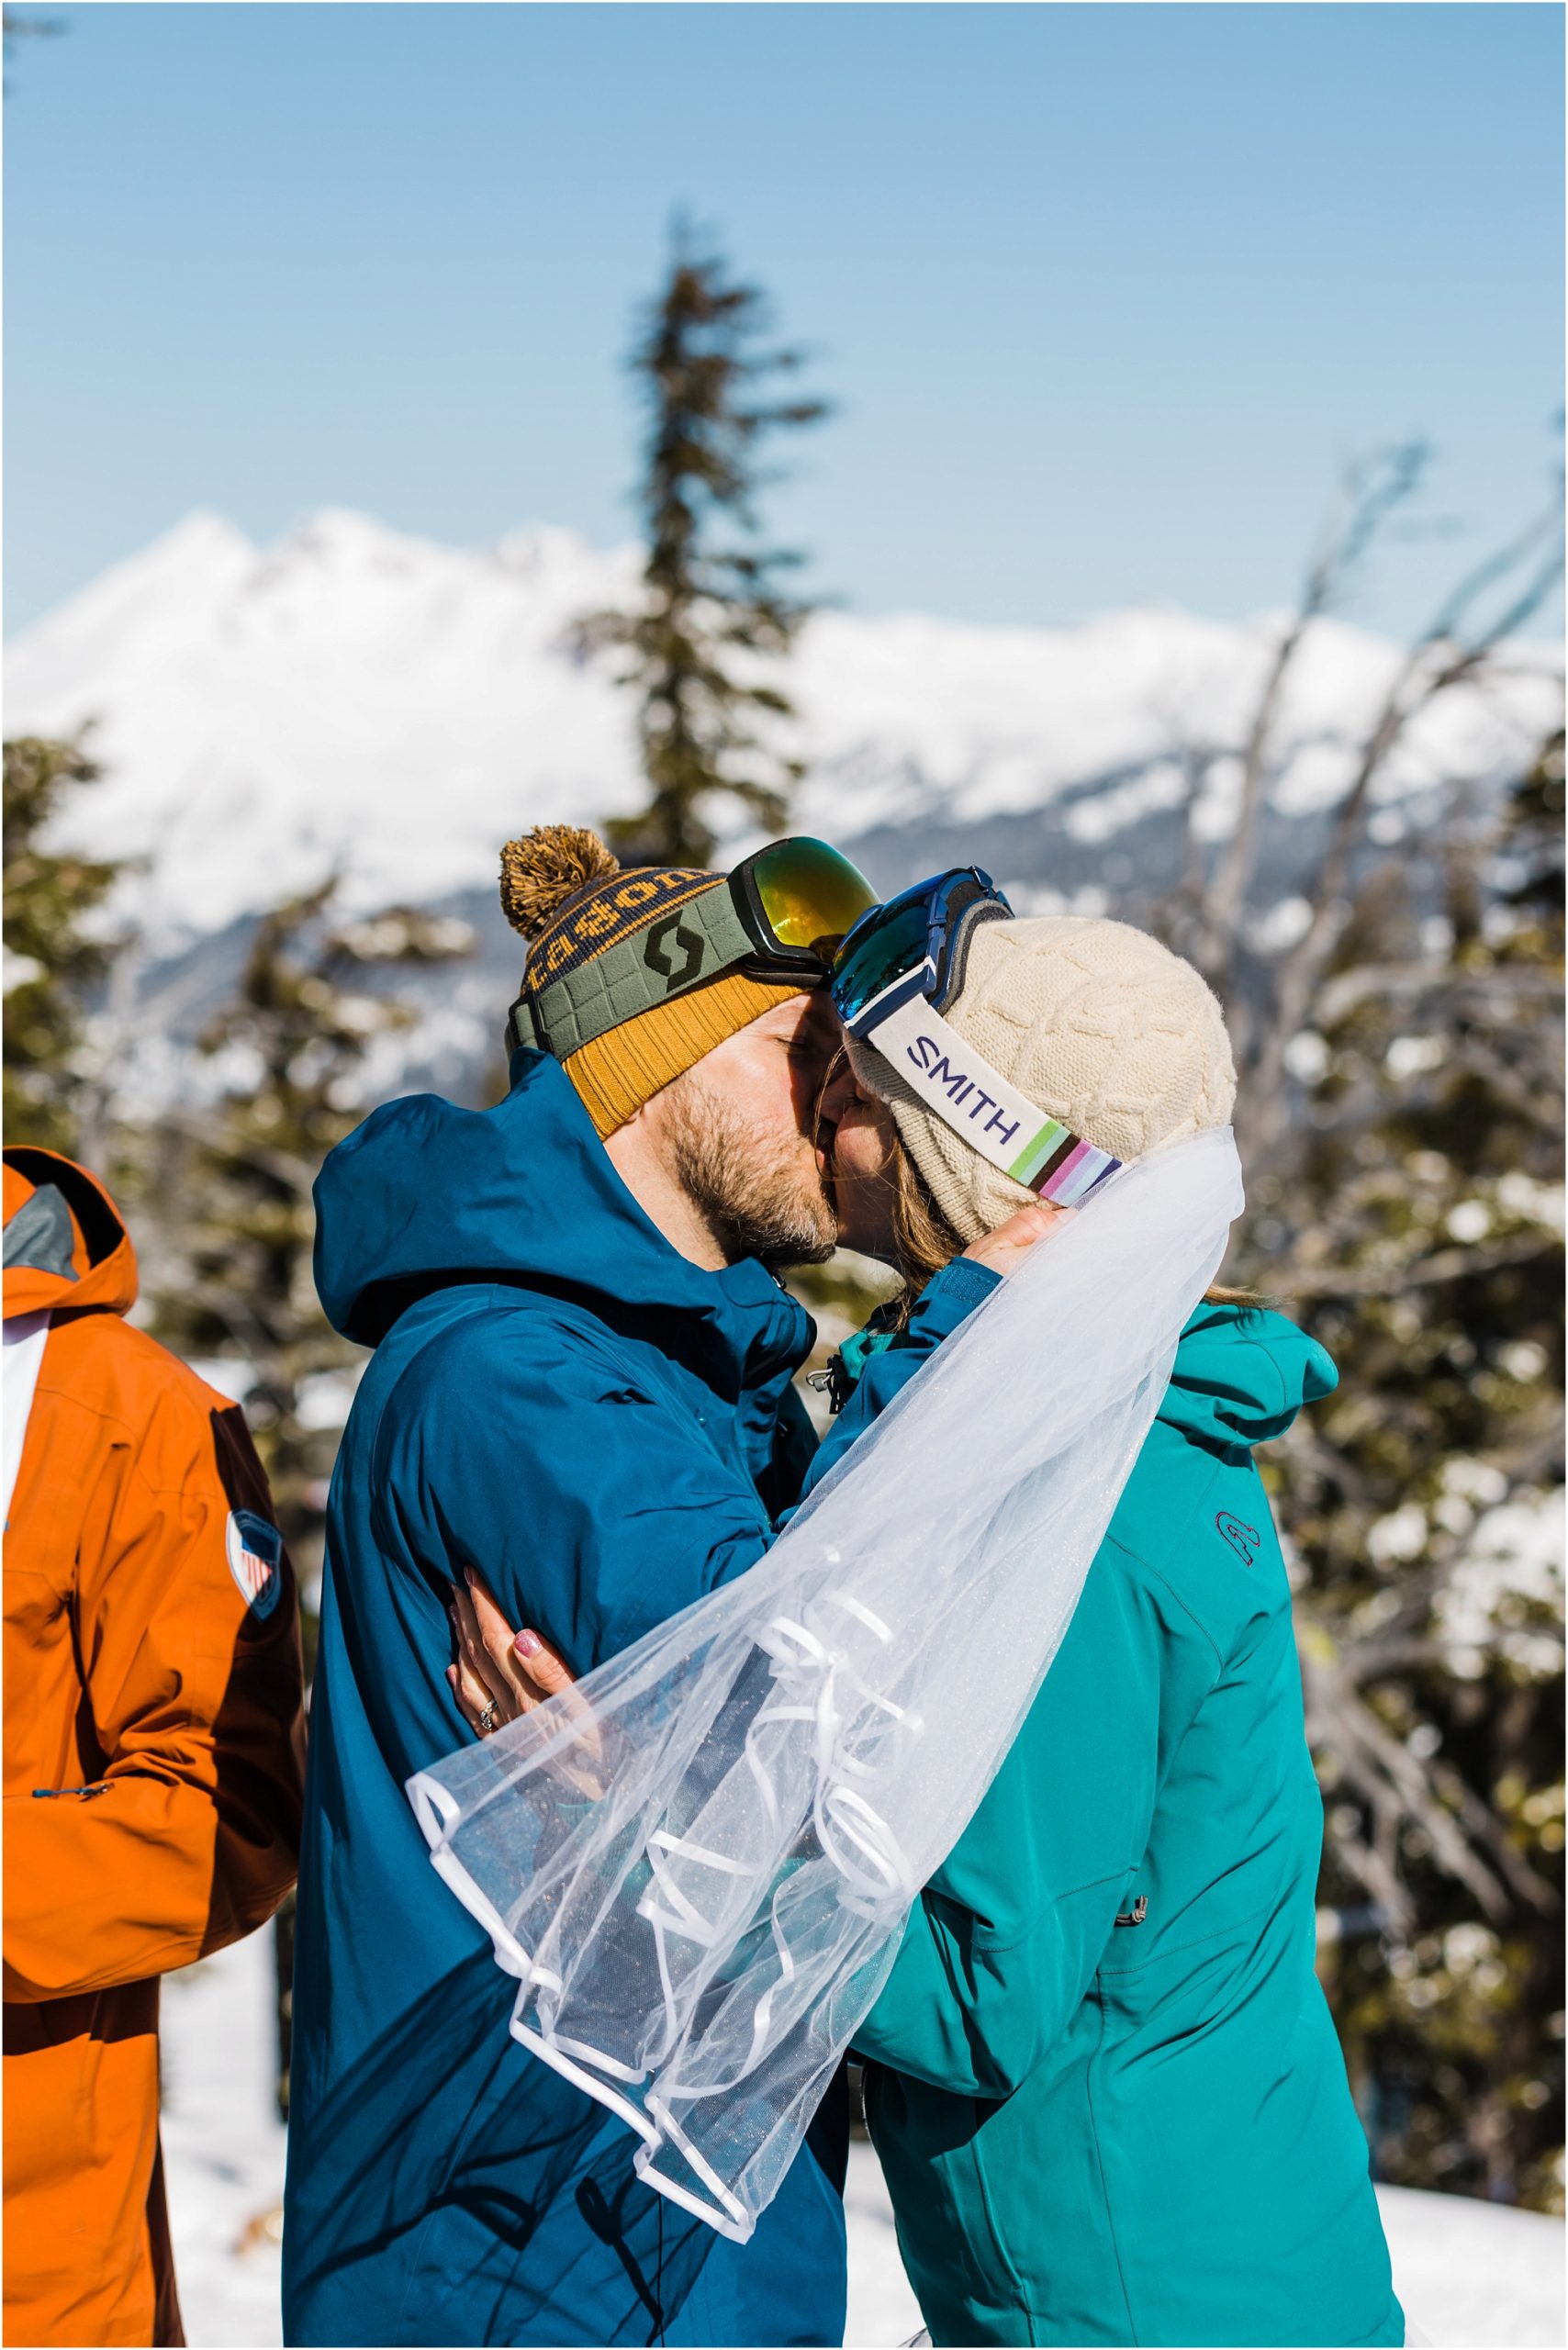 A couple shares their first kiss after their Mt Bachelor adventure elopement ceremony. | Erica Swantek Photography